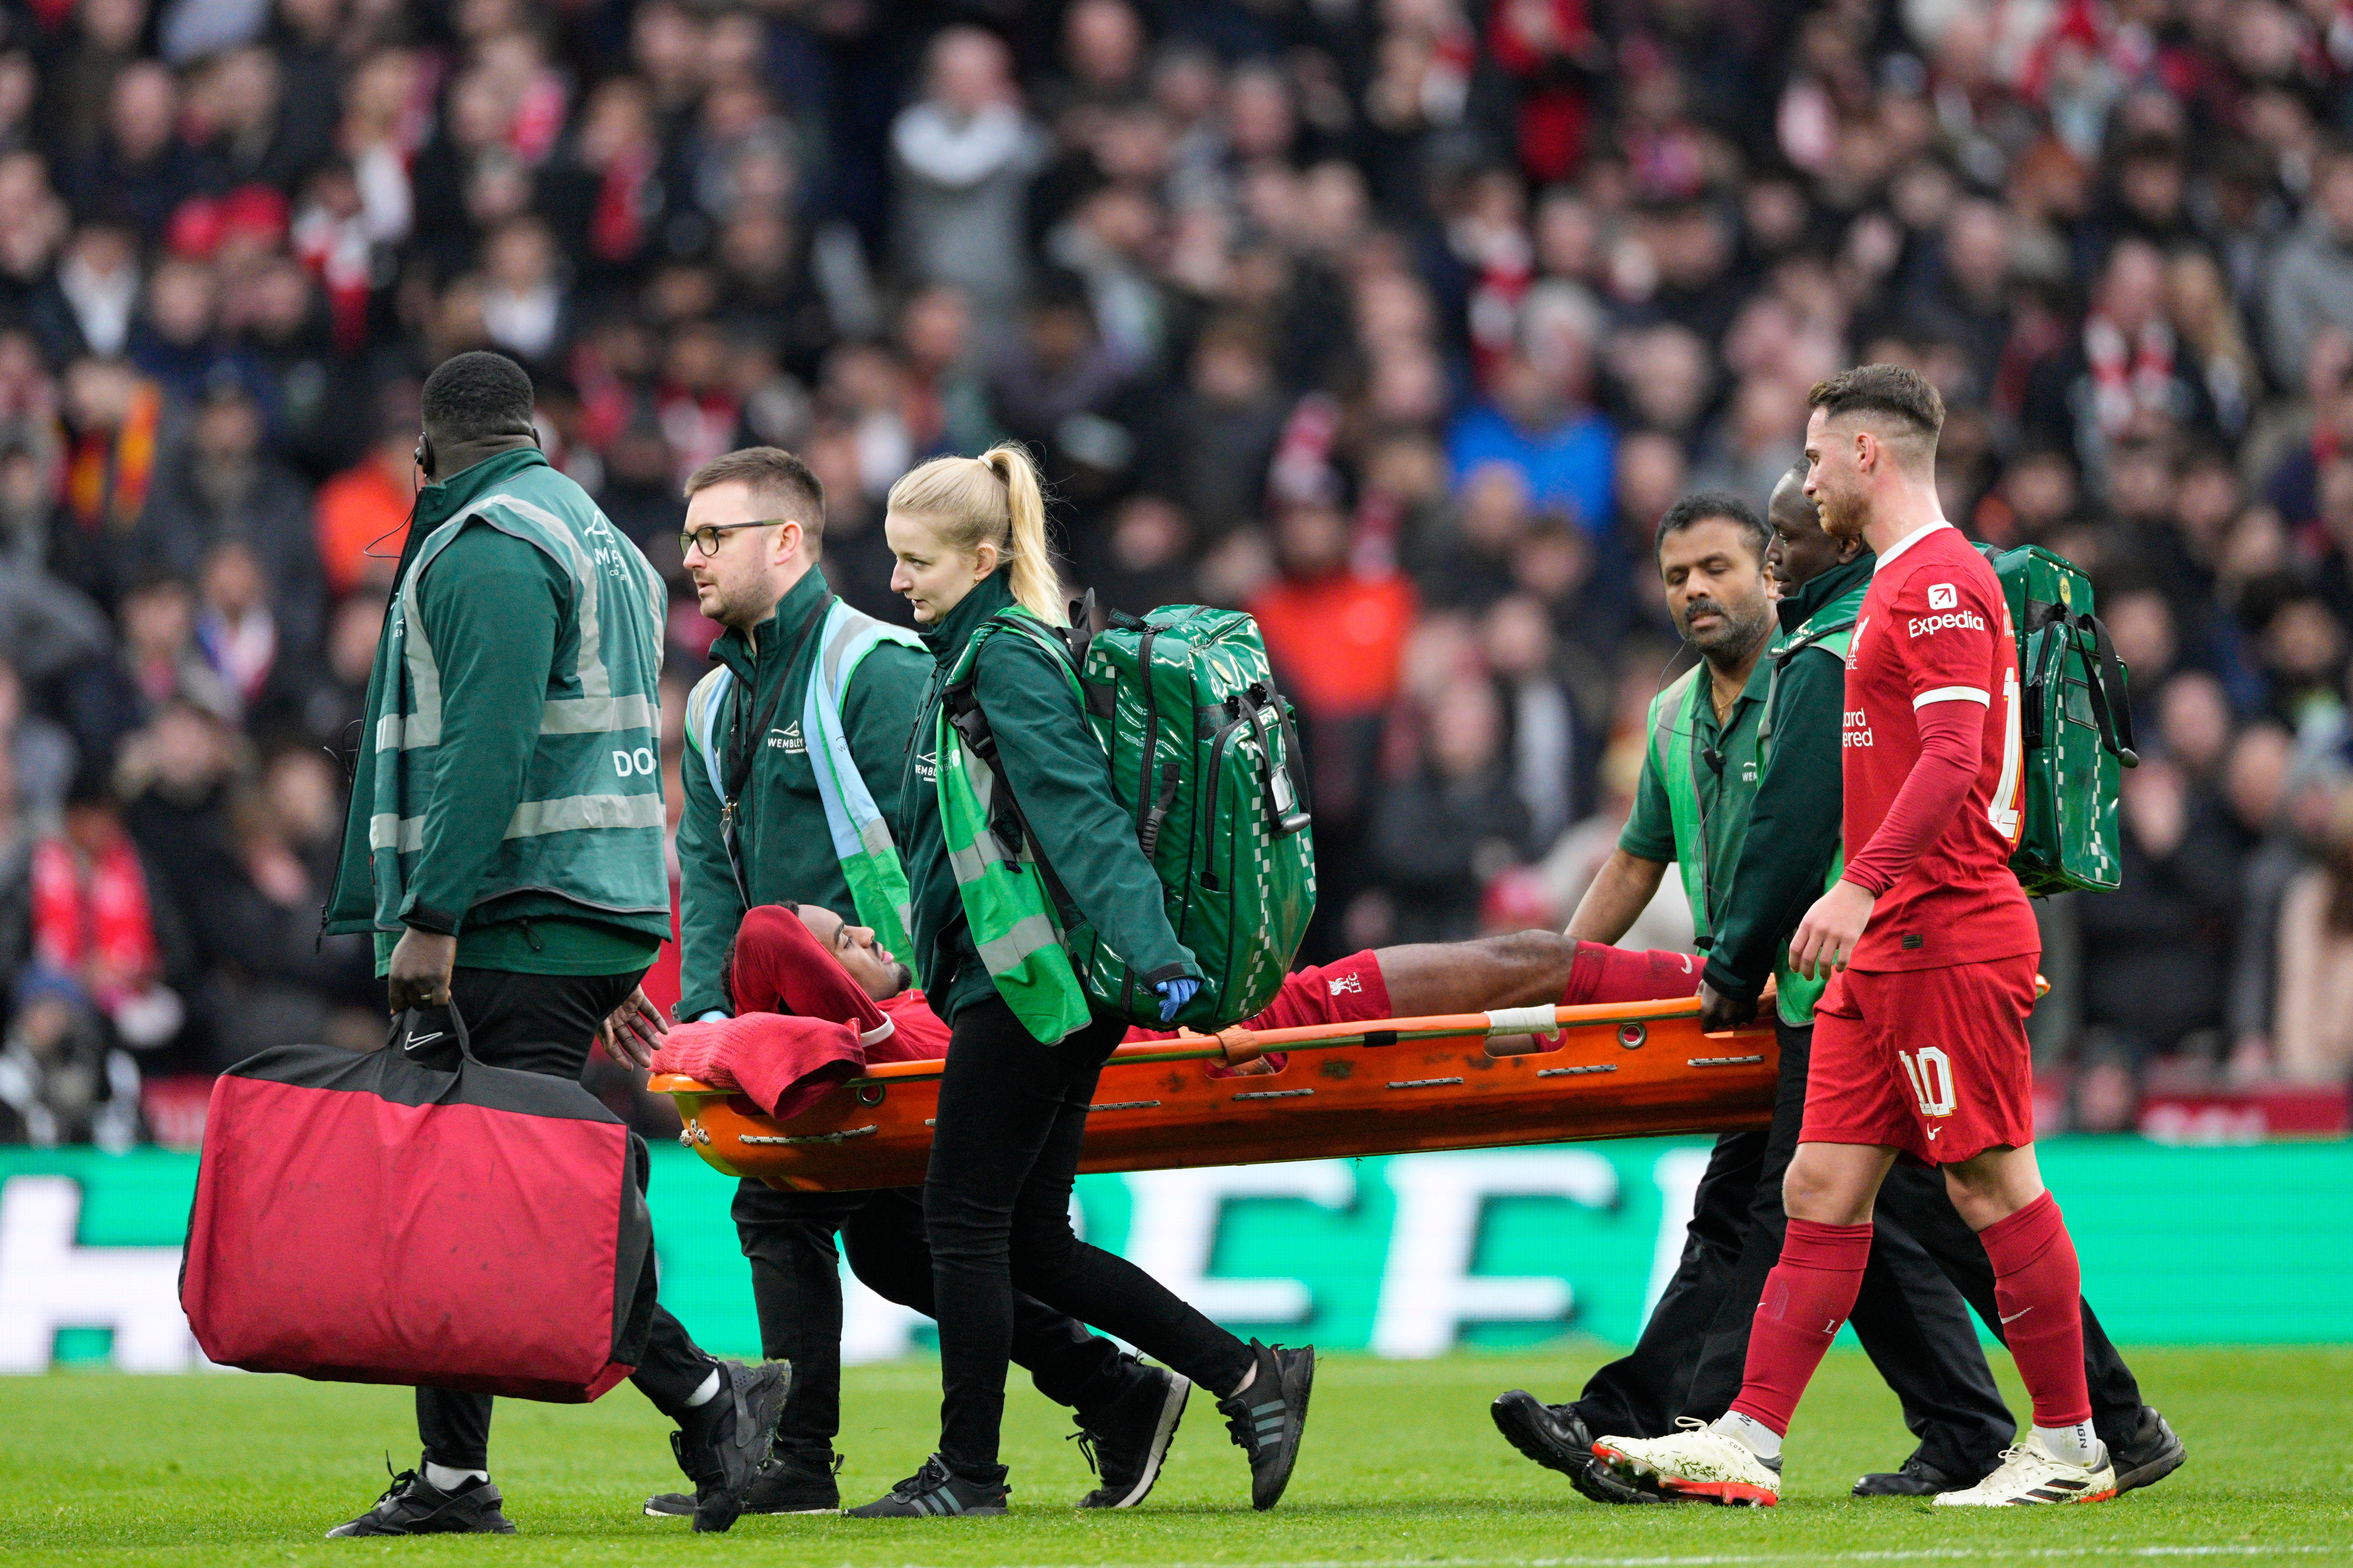 Liverpool have suffered a series of injuries this season